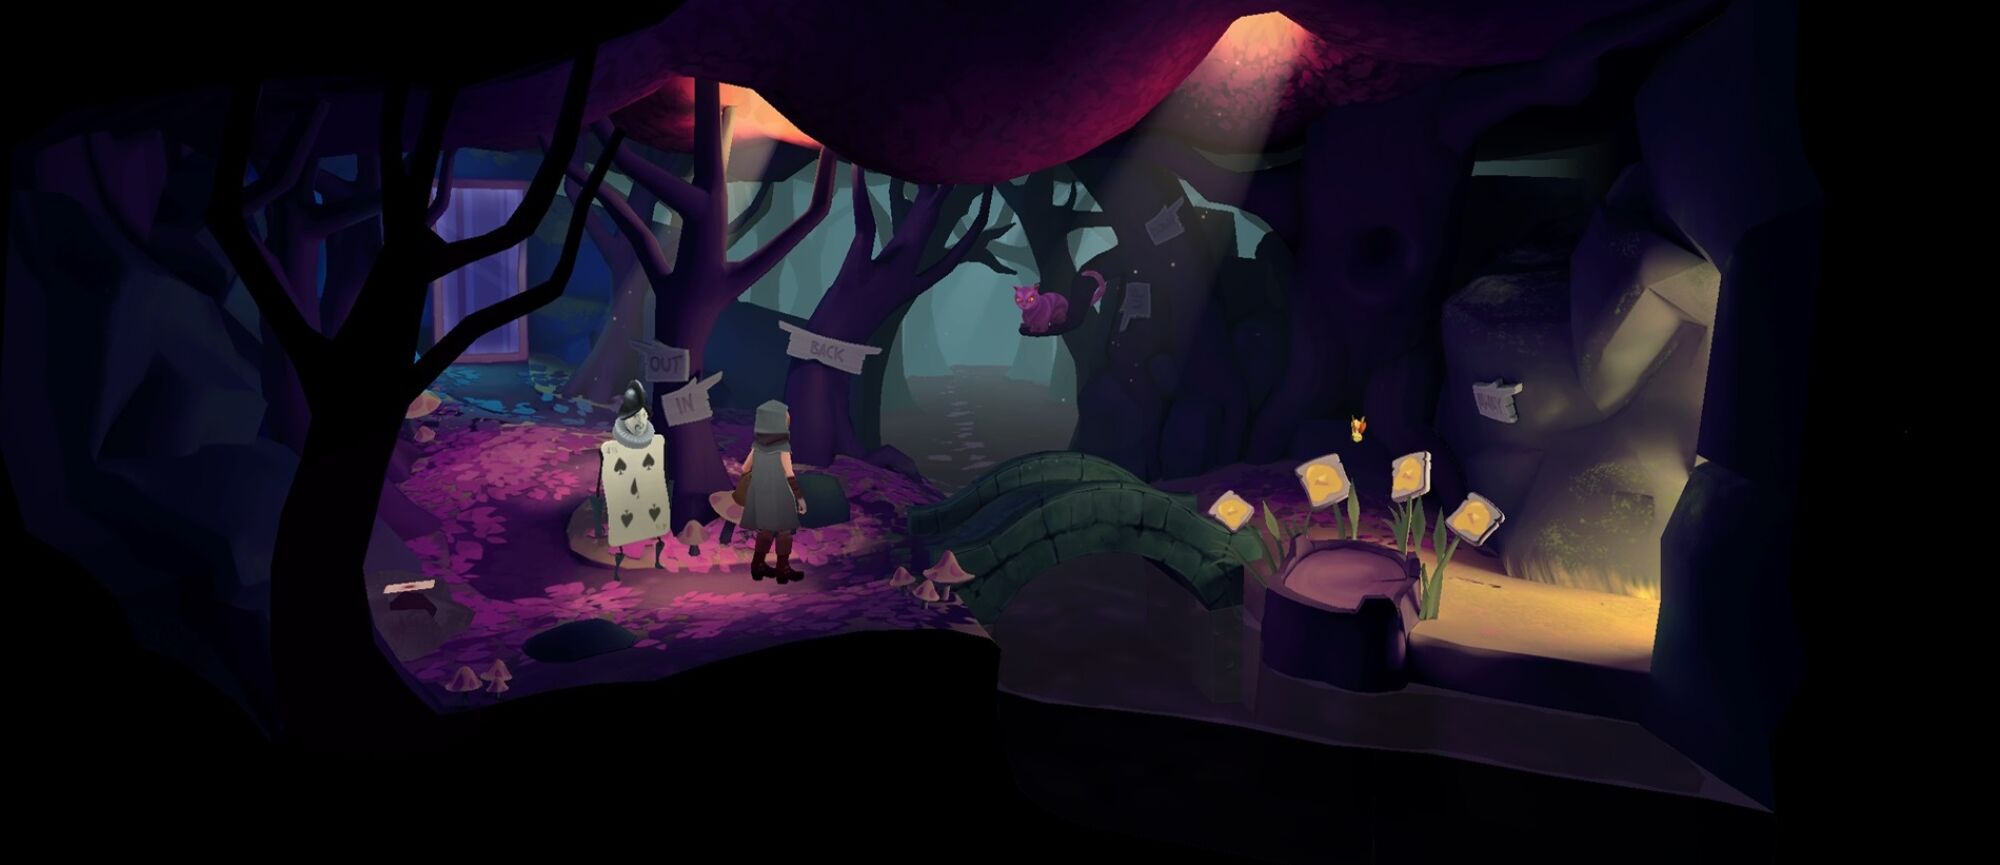 "Down the Rabbit Hole" presents the VR user with a world of diorama-like settings.